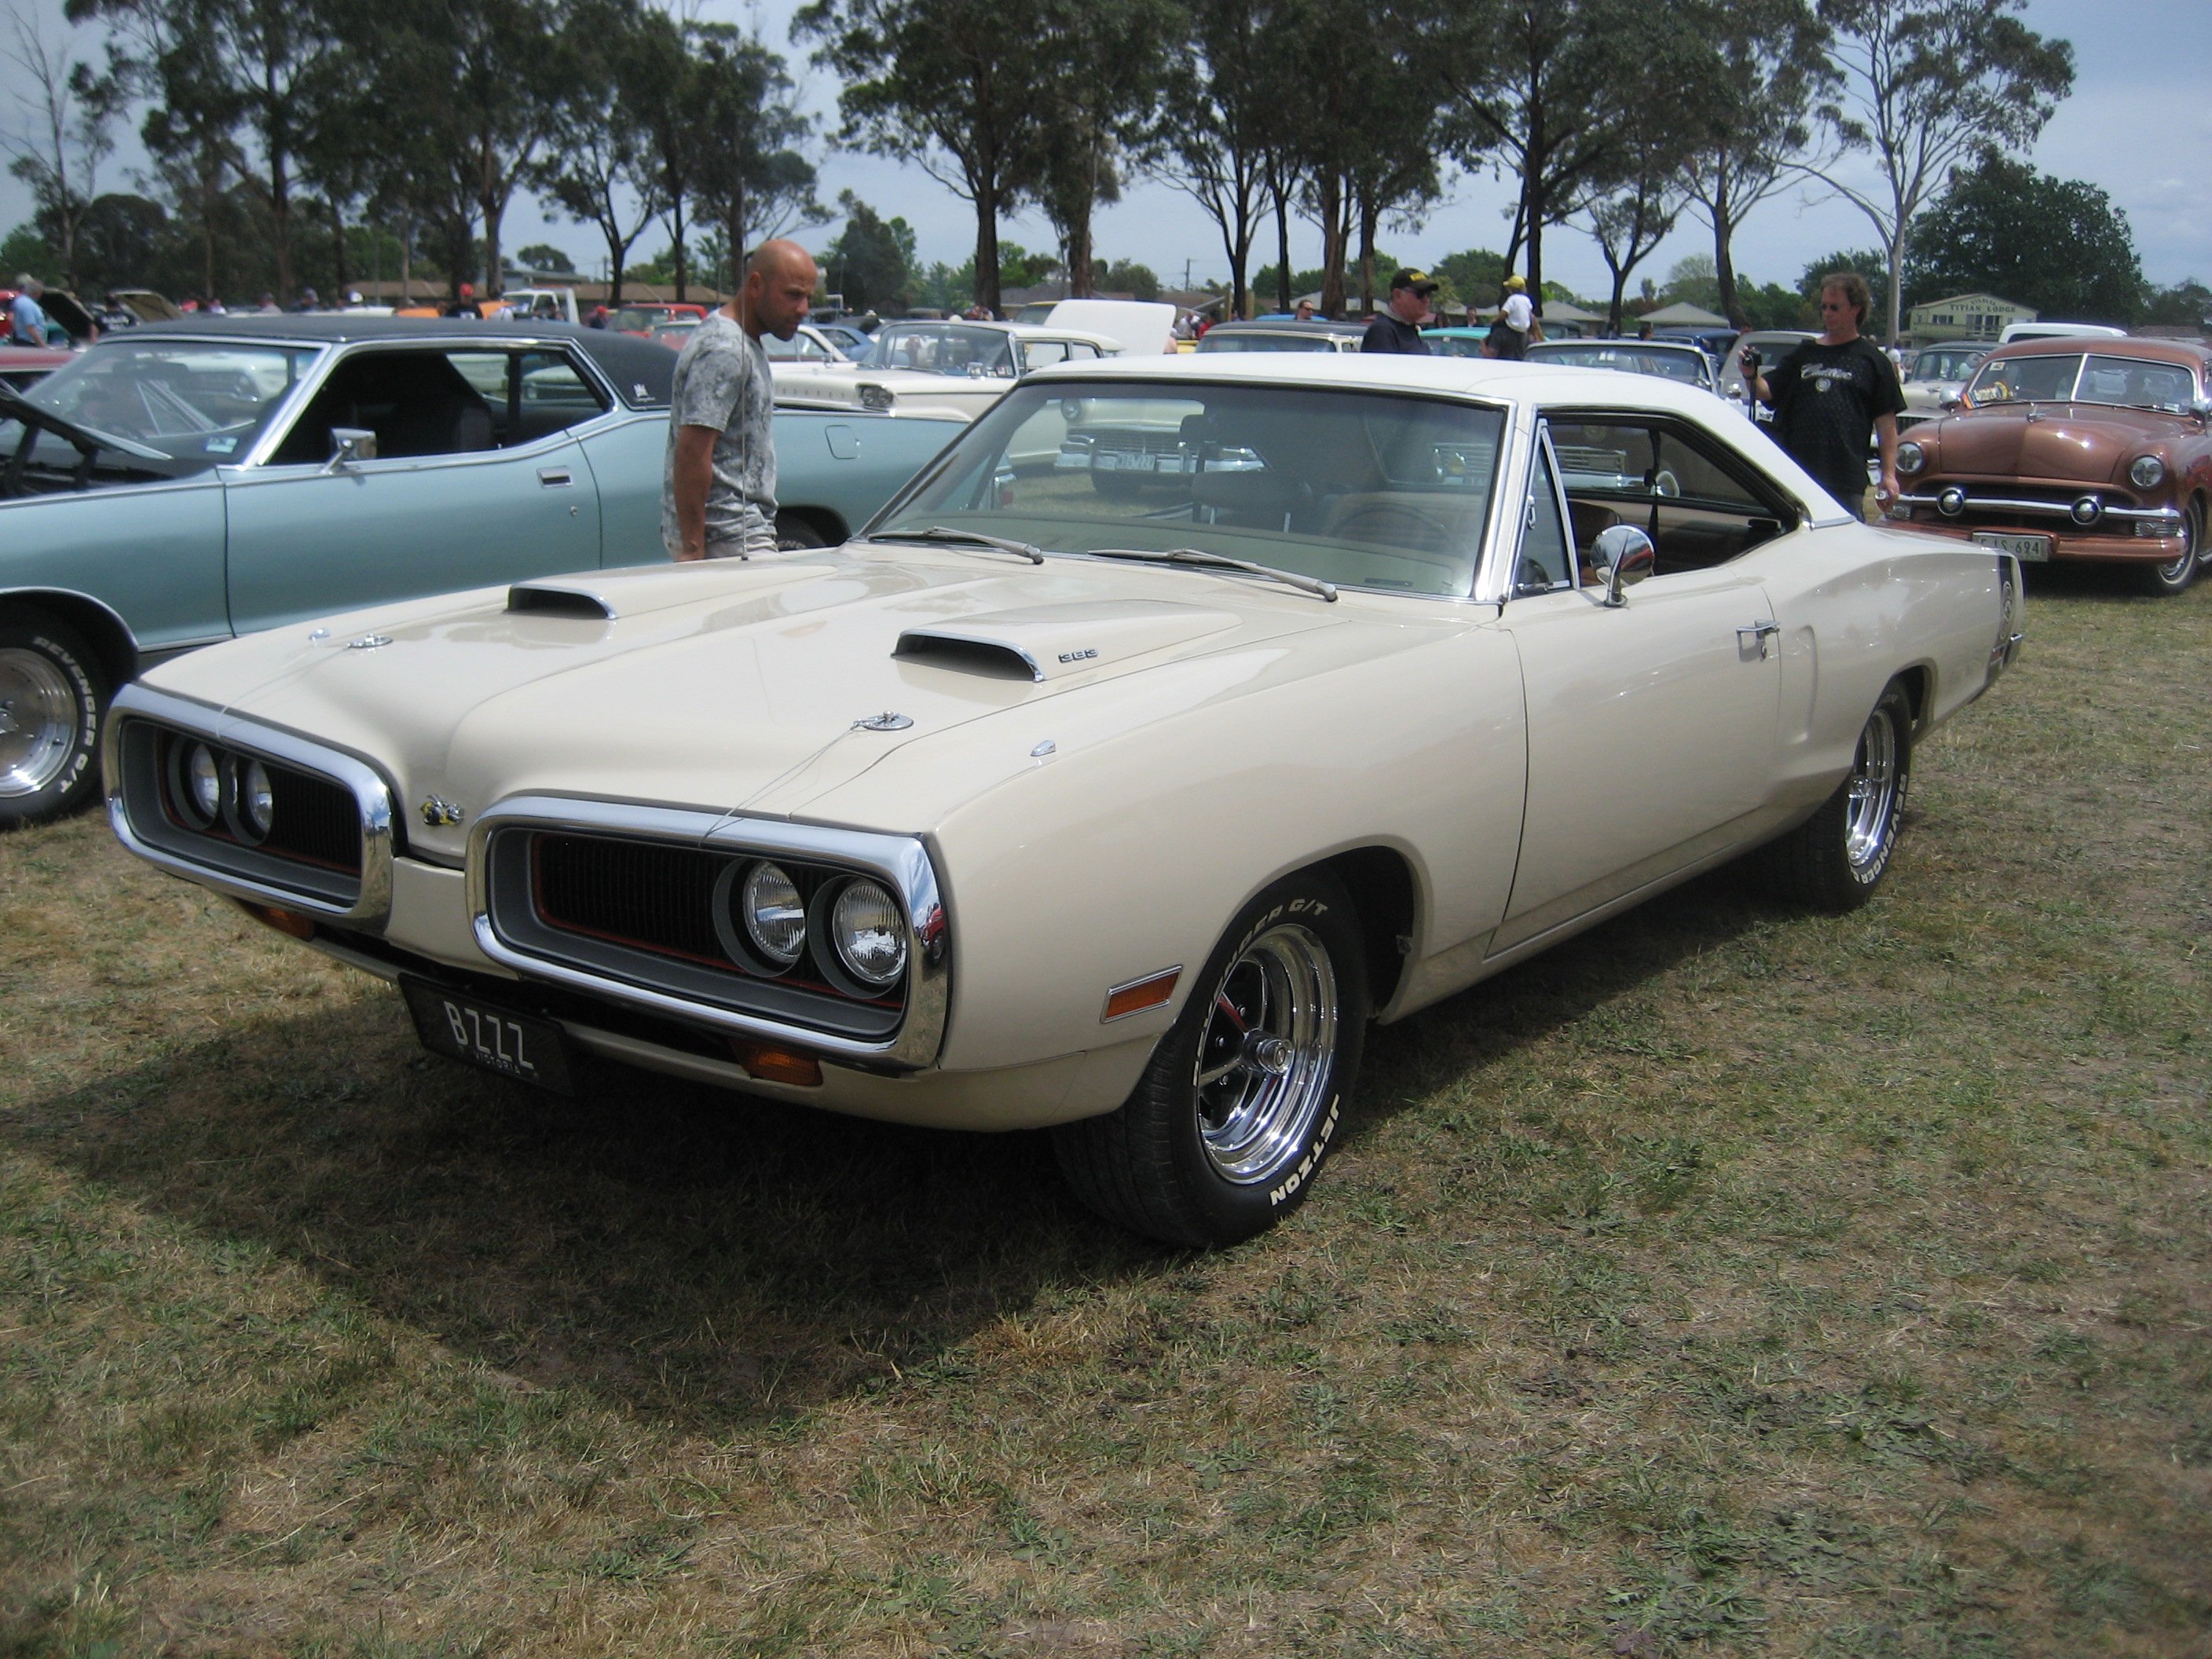  1970 Dodge Coronet Super Bee Coupe muscle classic wallpaper background